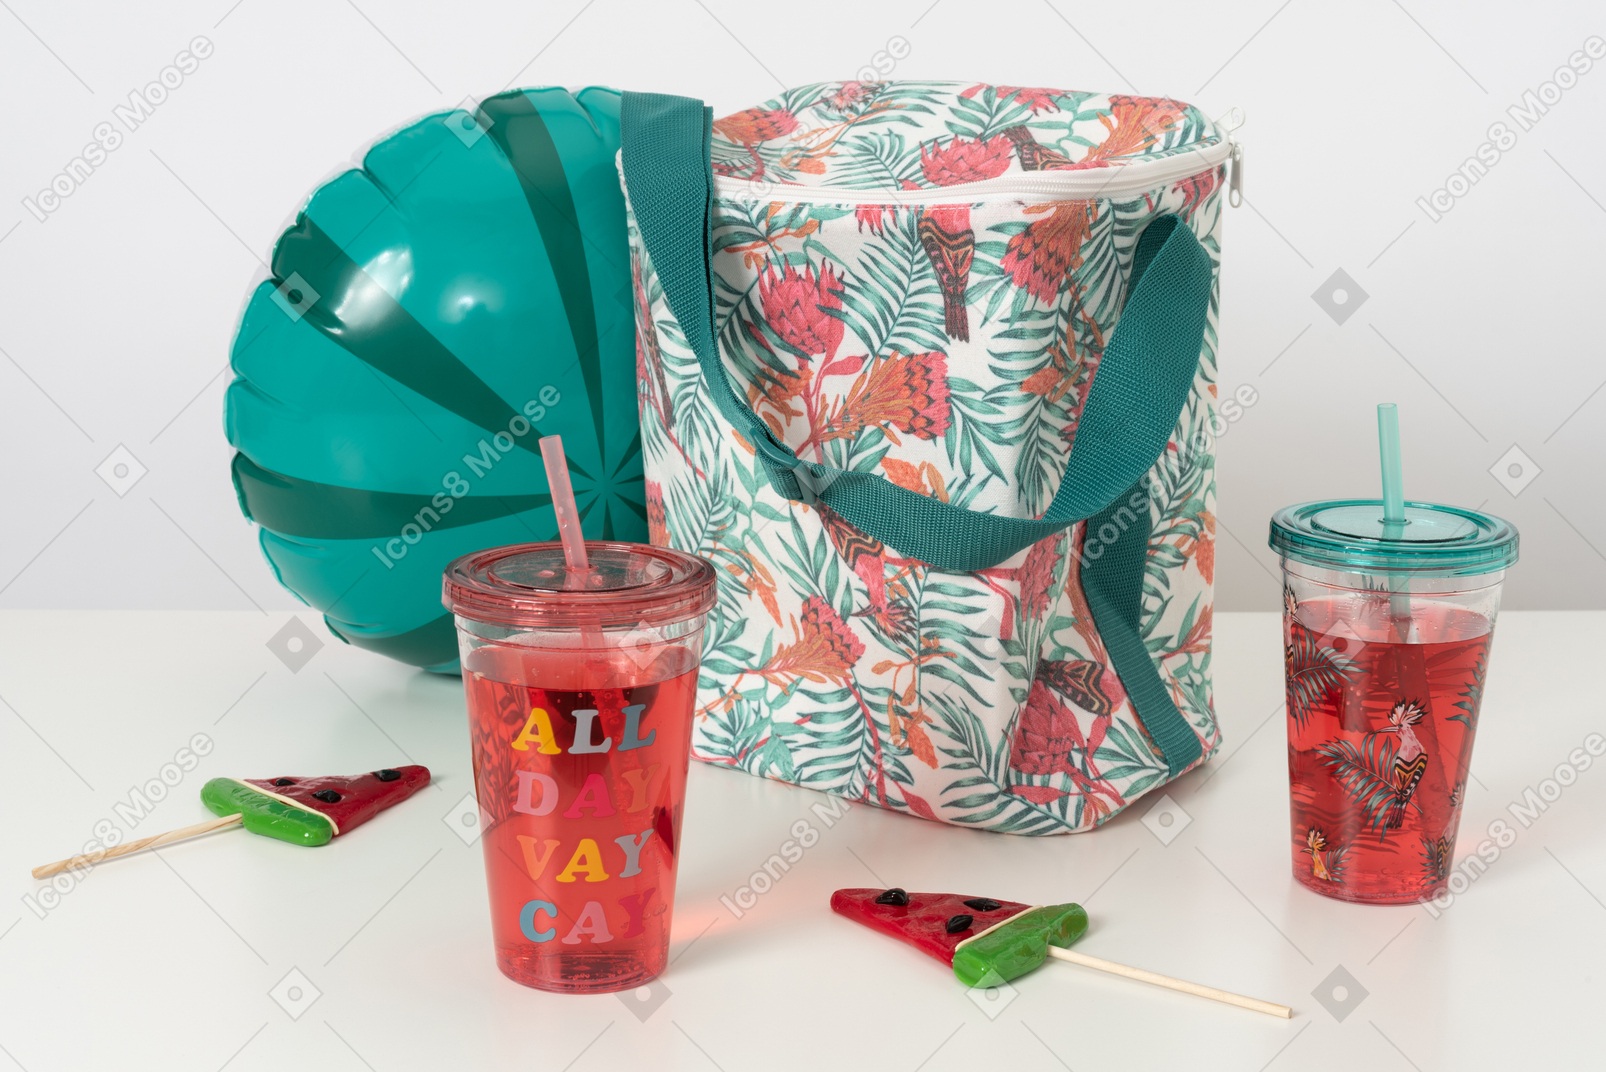 A thermal bag with food for a picnic, an inflatable toy to have some fun in water and drinks on top of all of that, as the best recipe for a hot summer day off